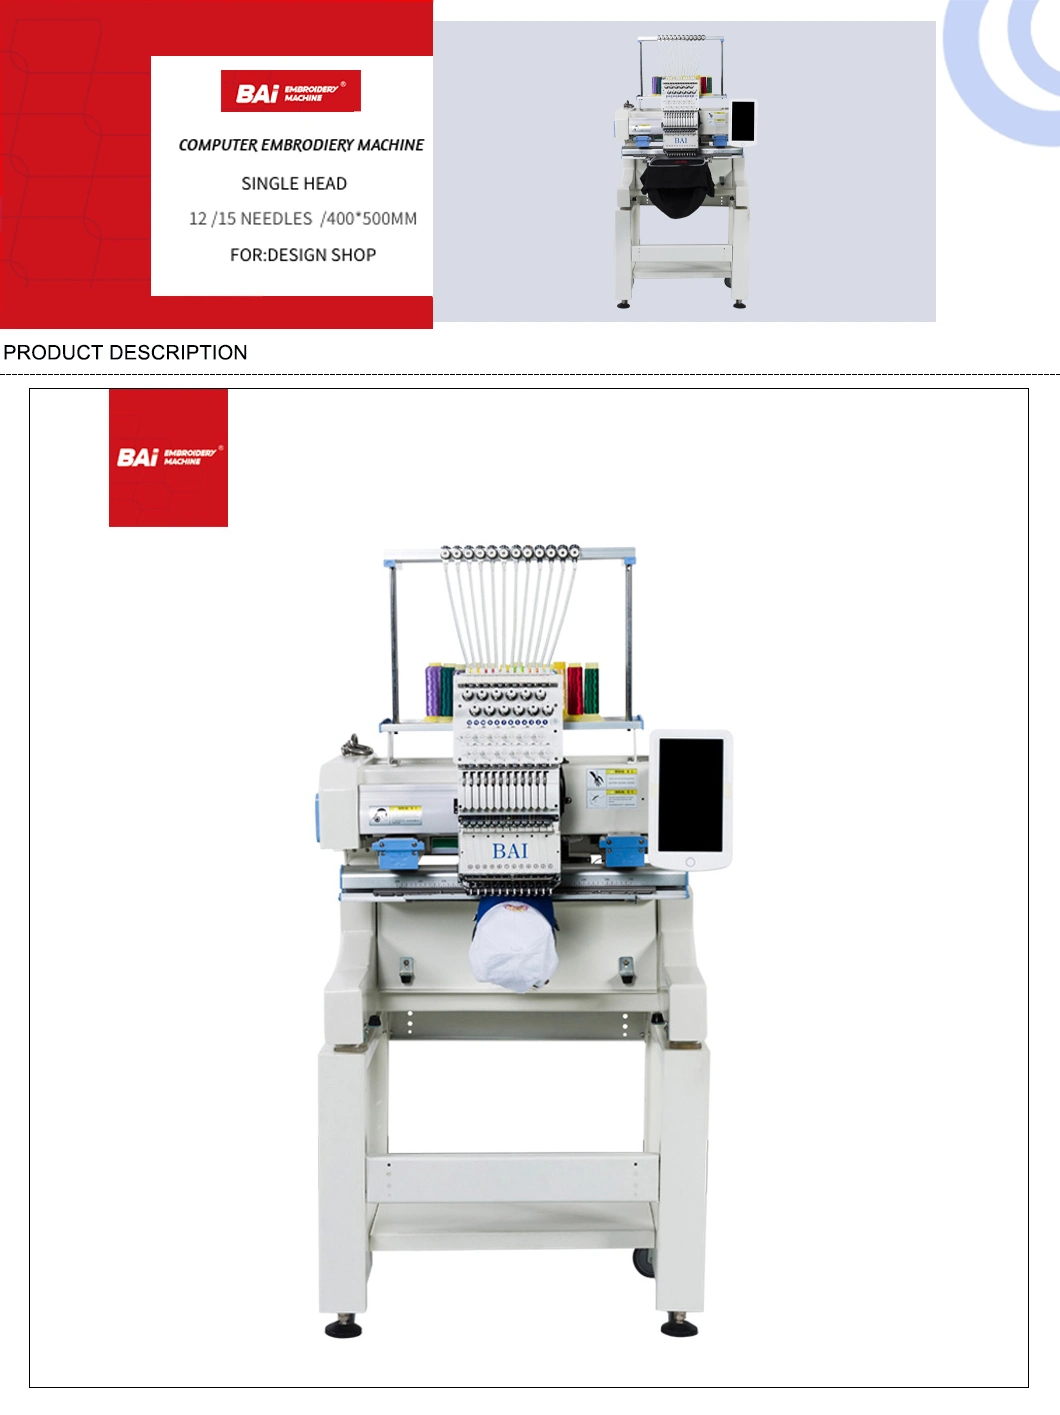 Bai Computer Embroidery Machine with Commercial for Sewing Embroidery Machine